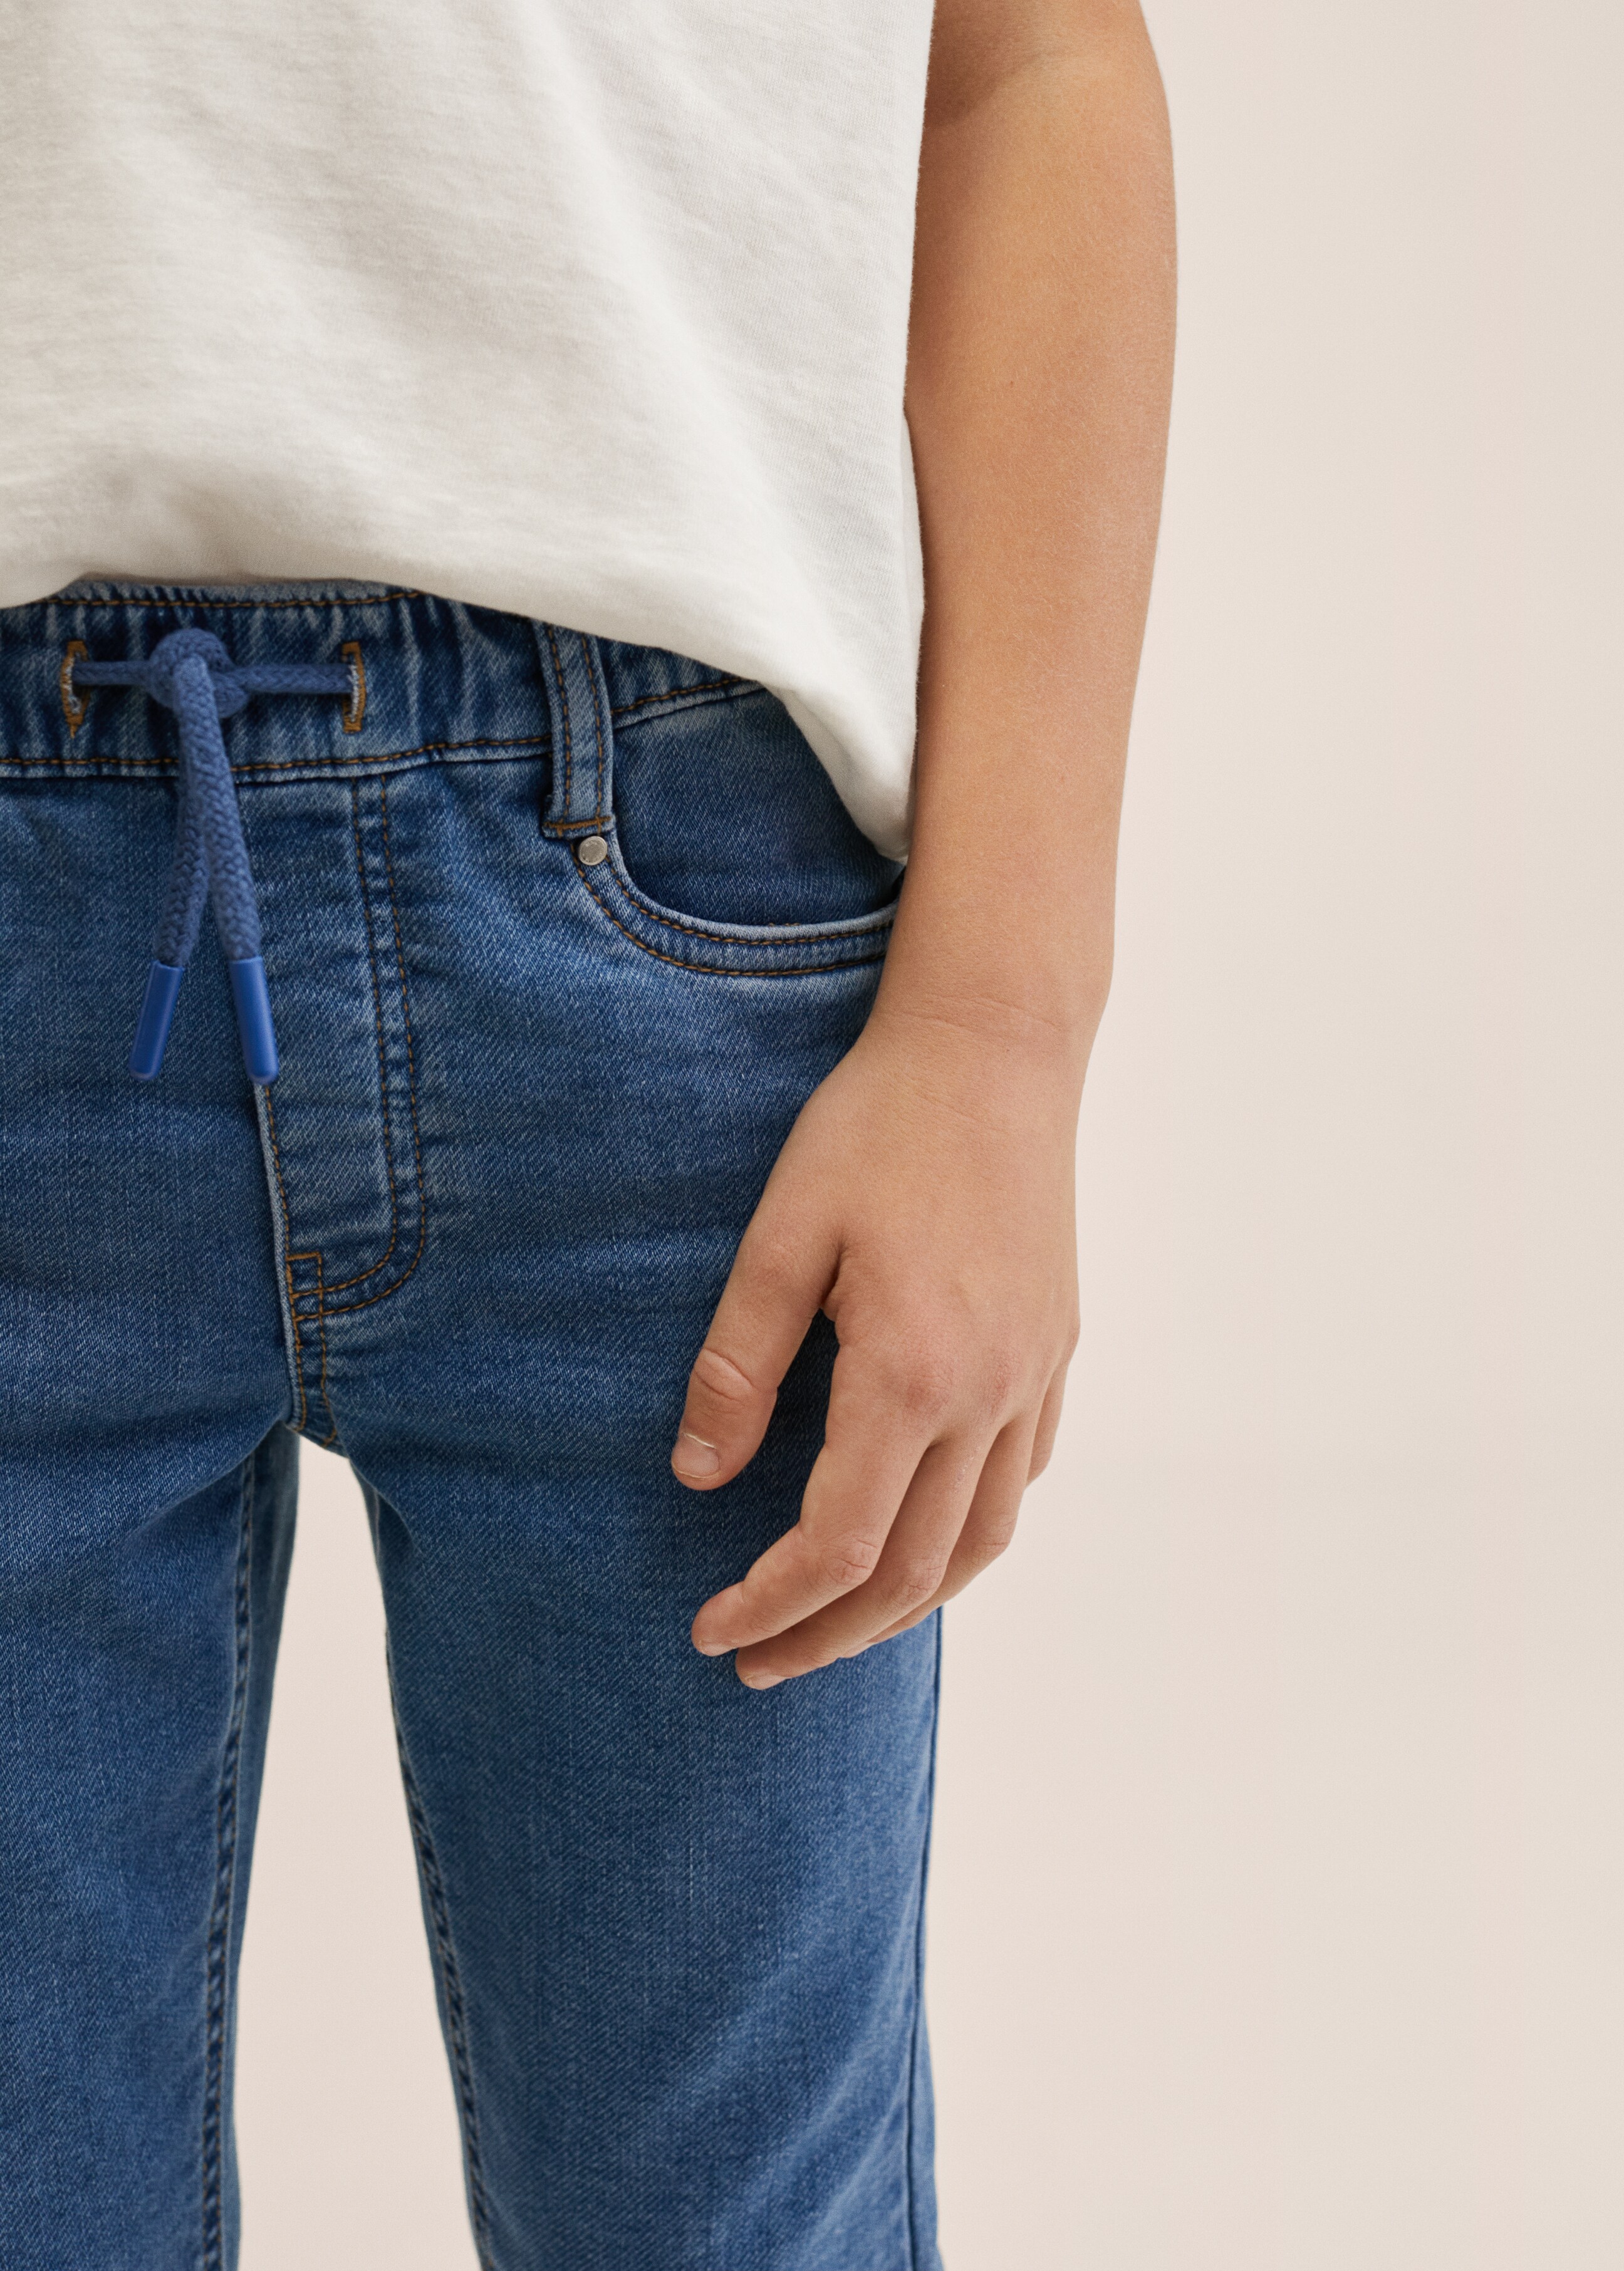 Lace drawstring waist jeans - Details of the article 1